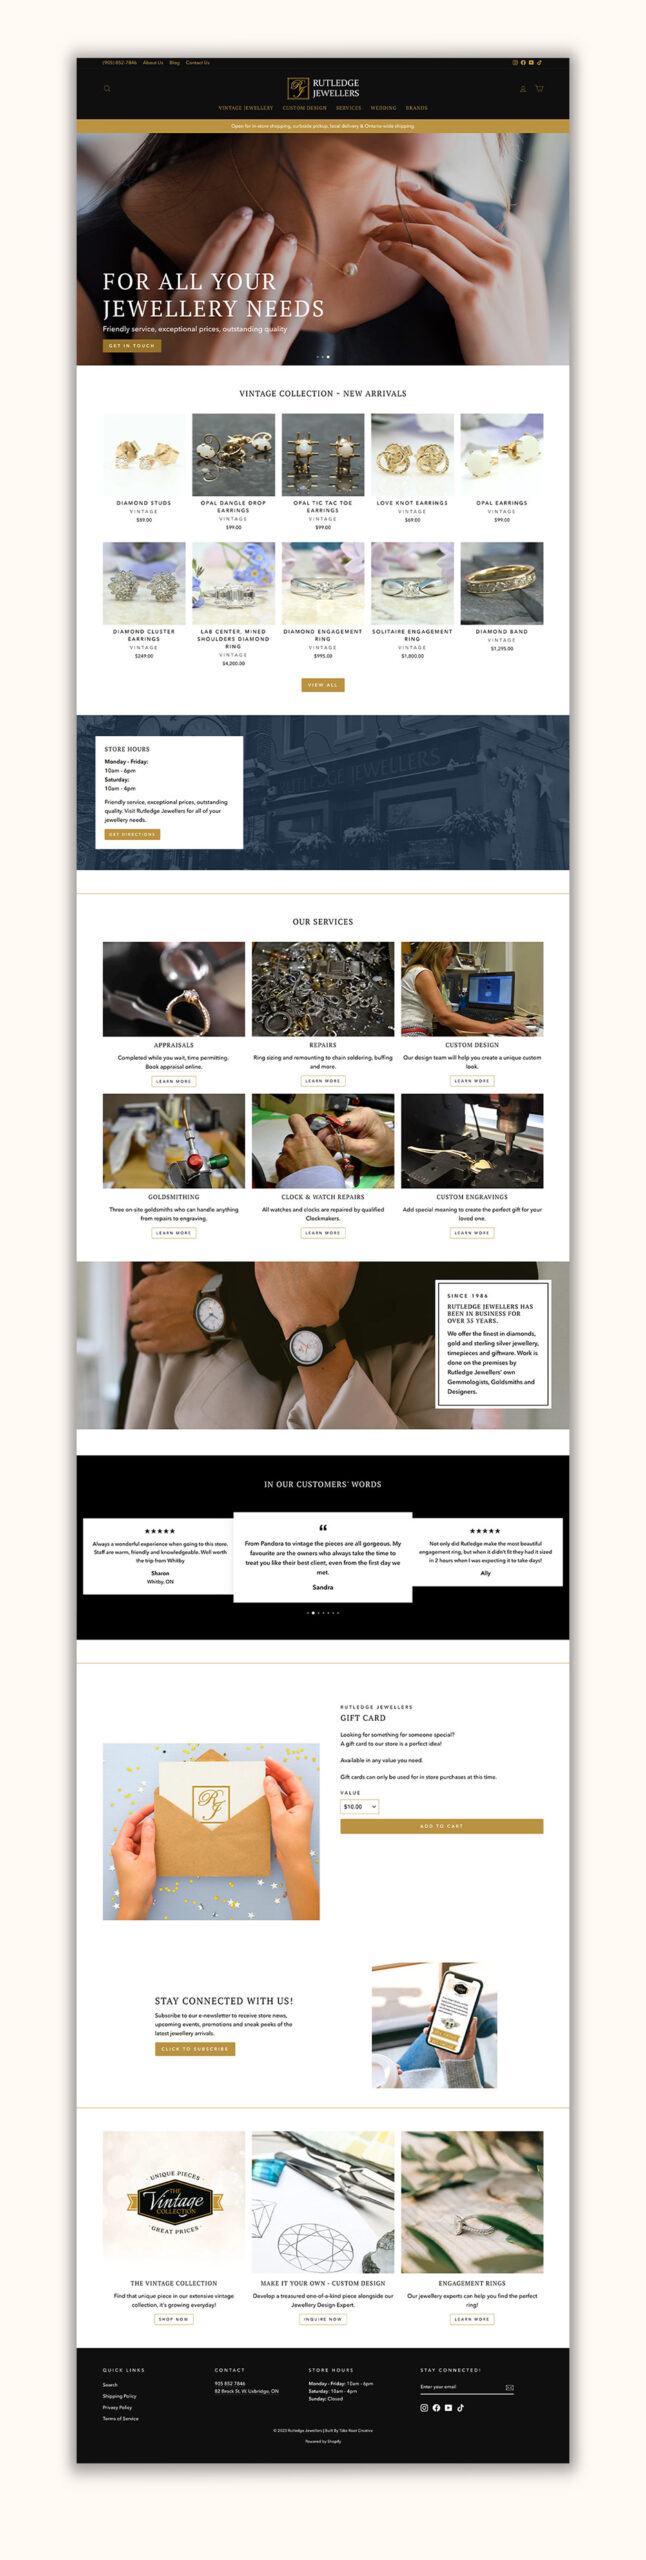 rutledge-jewelers-home-page-website-design